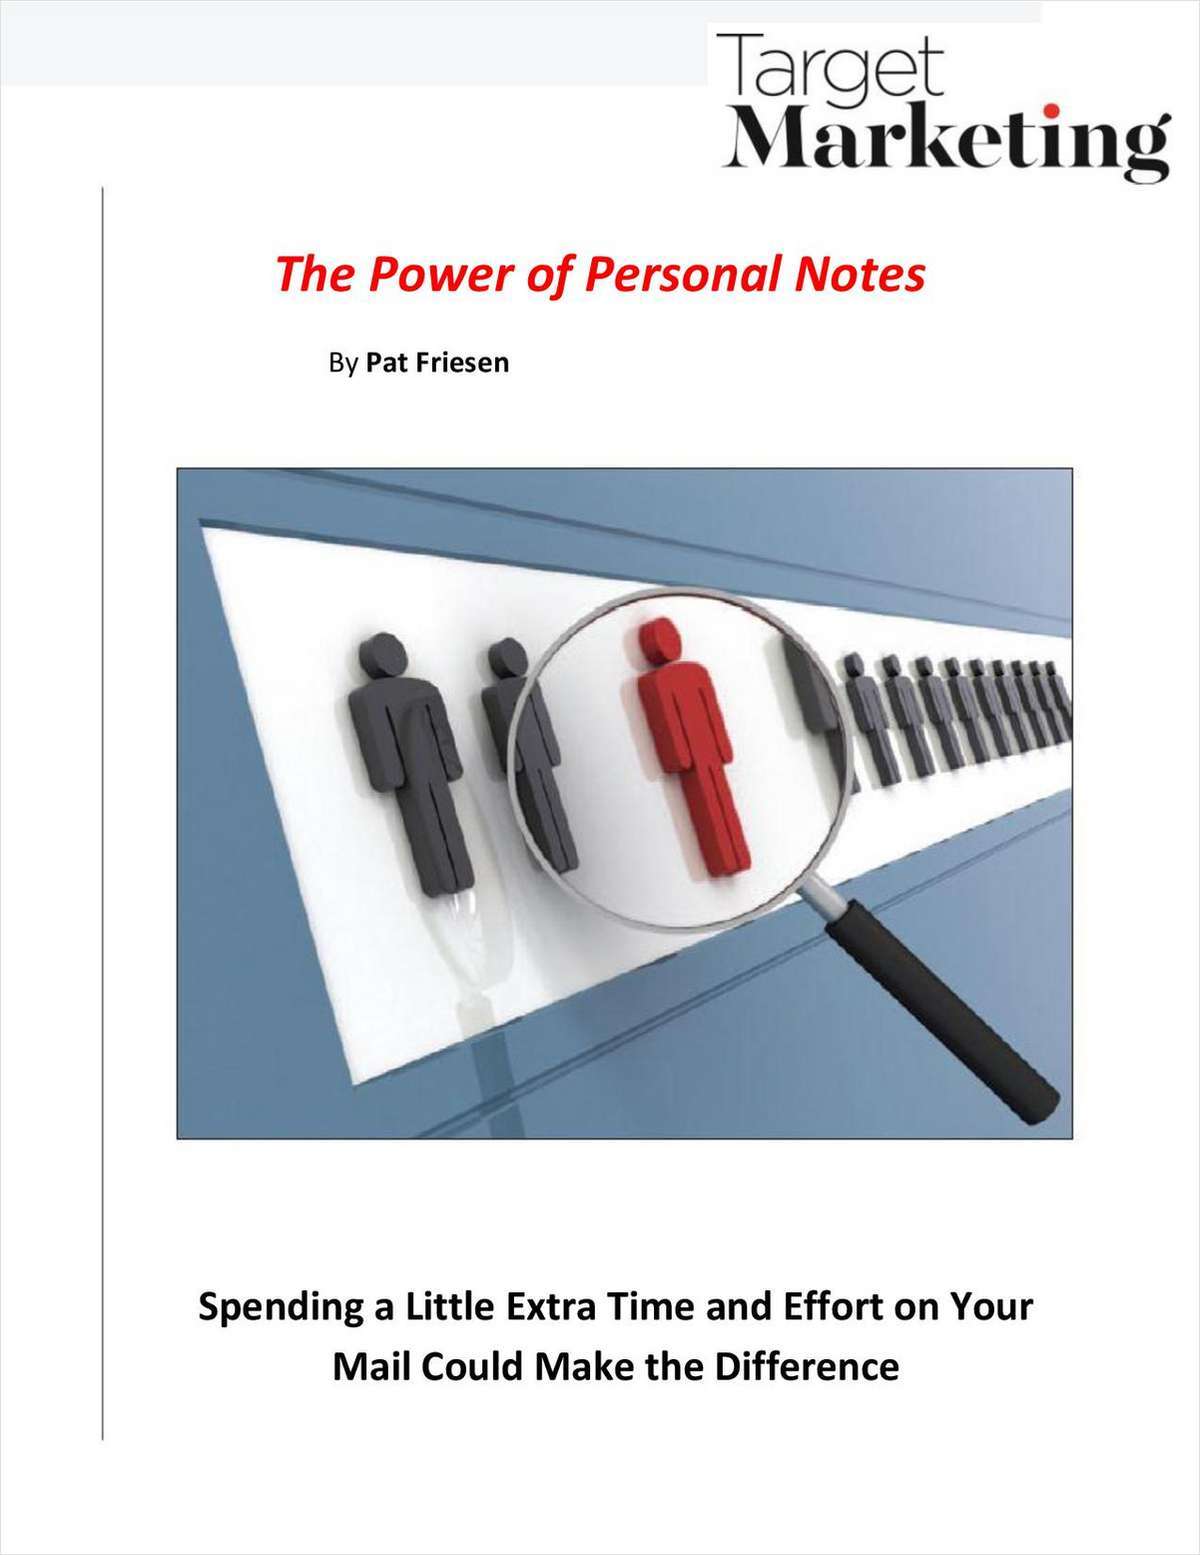 The Power of Personal Notes